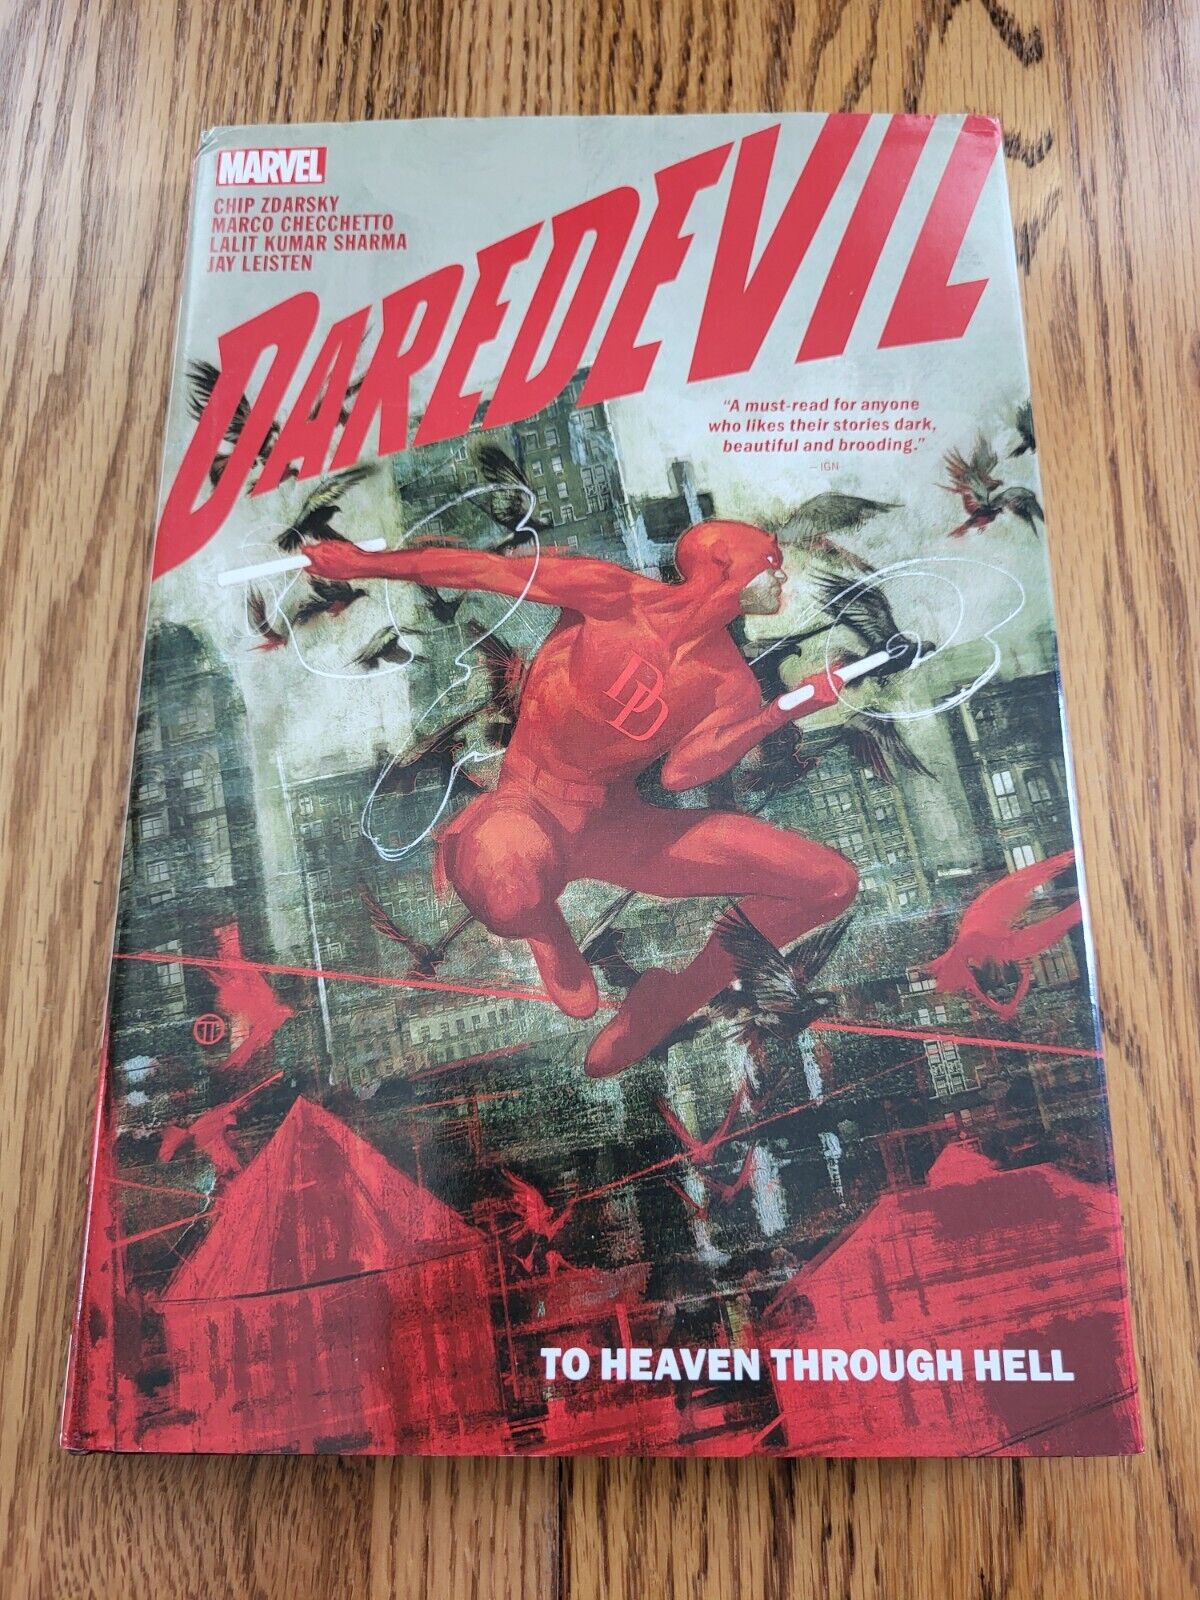 Marvel Comics Daredevil: To Heaven Through Hell (Hardcover, 2020) - Excellent